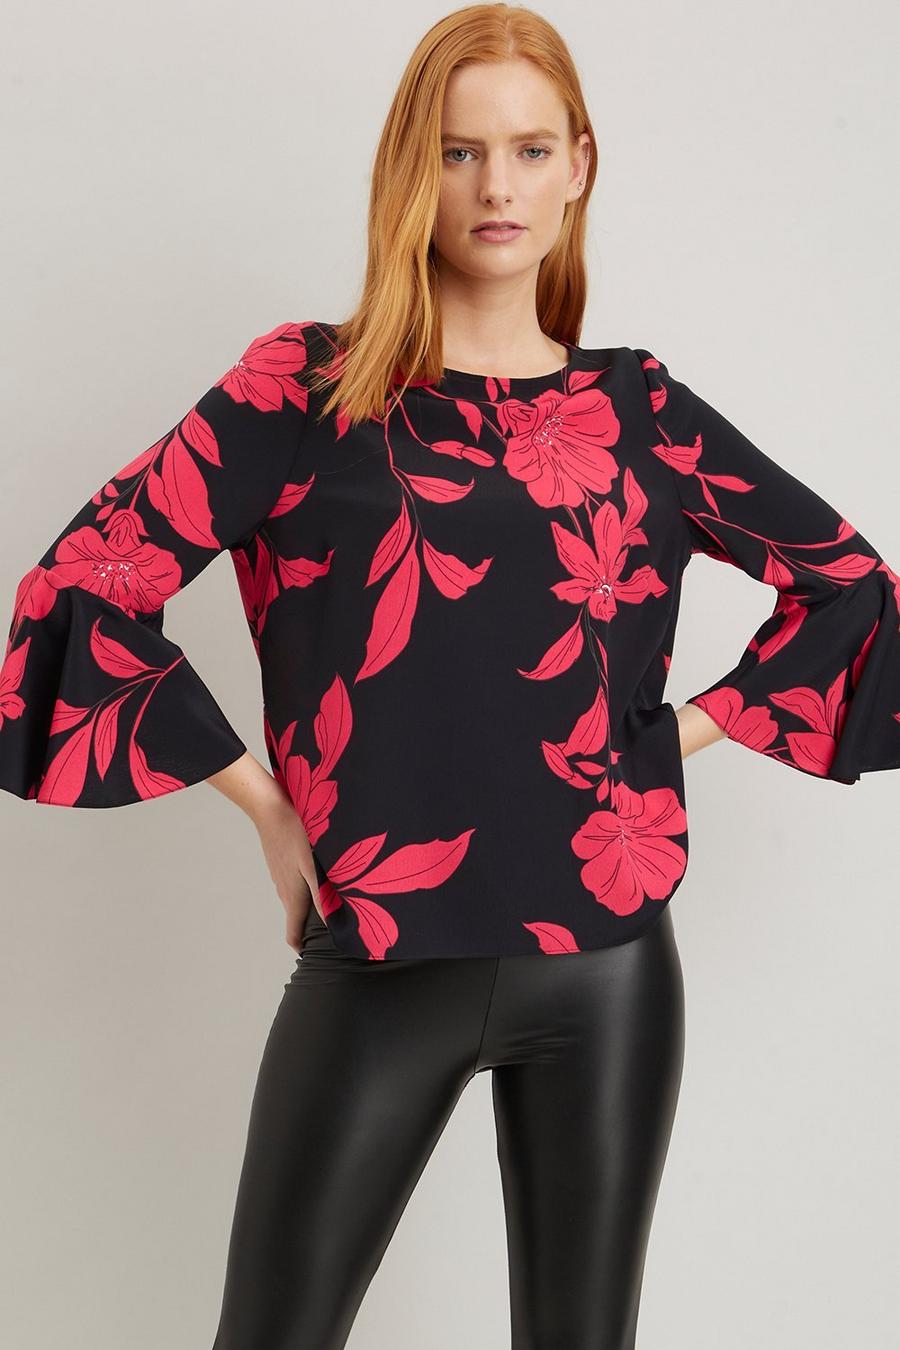 Black And Pink Floral Flute Sleeve Top